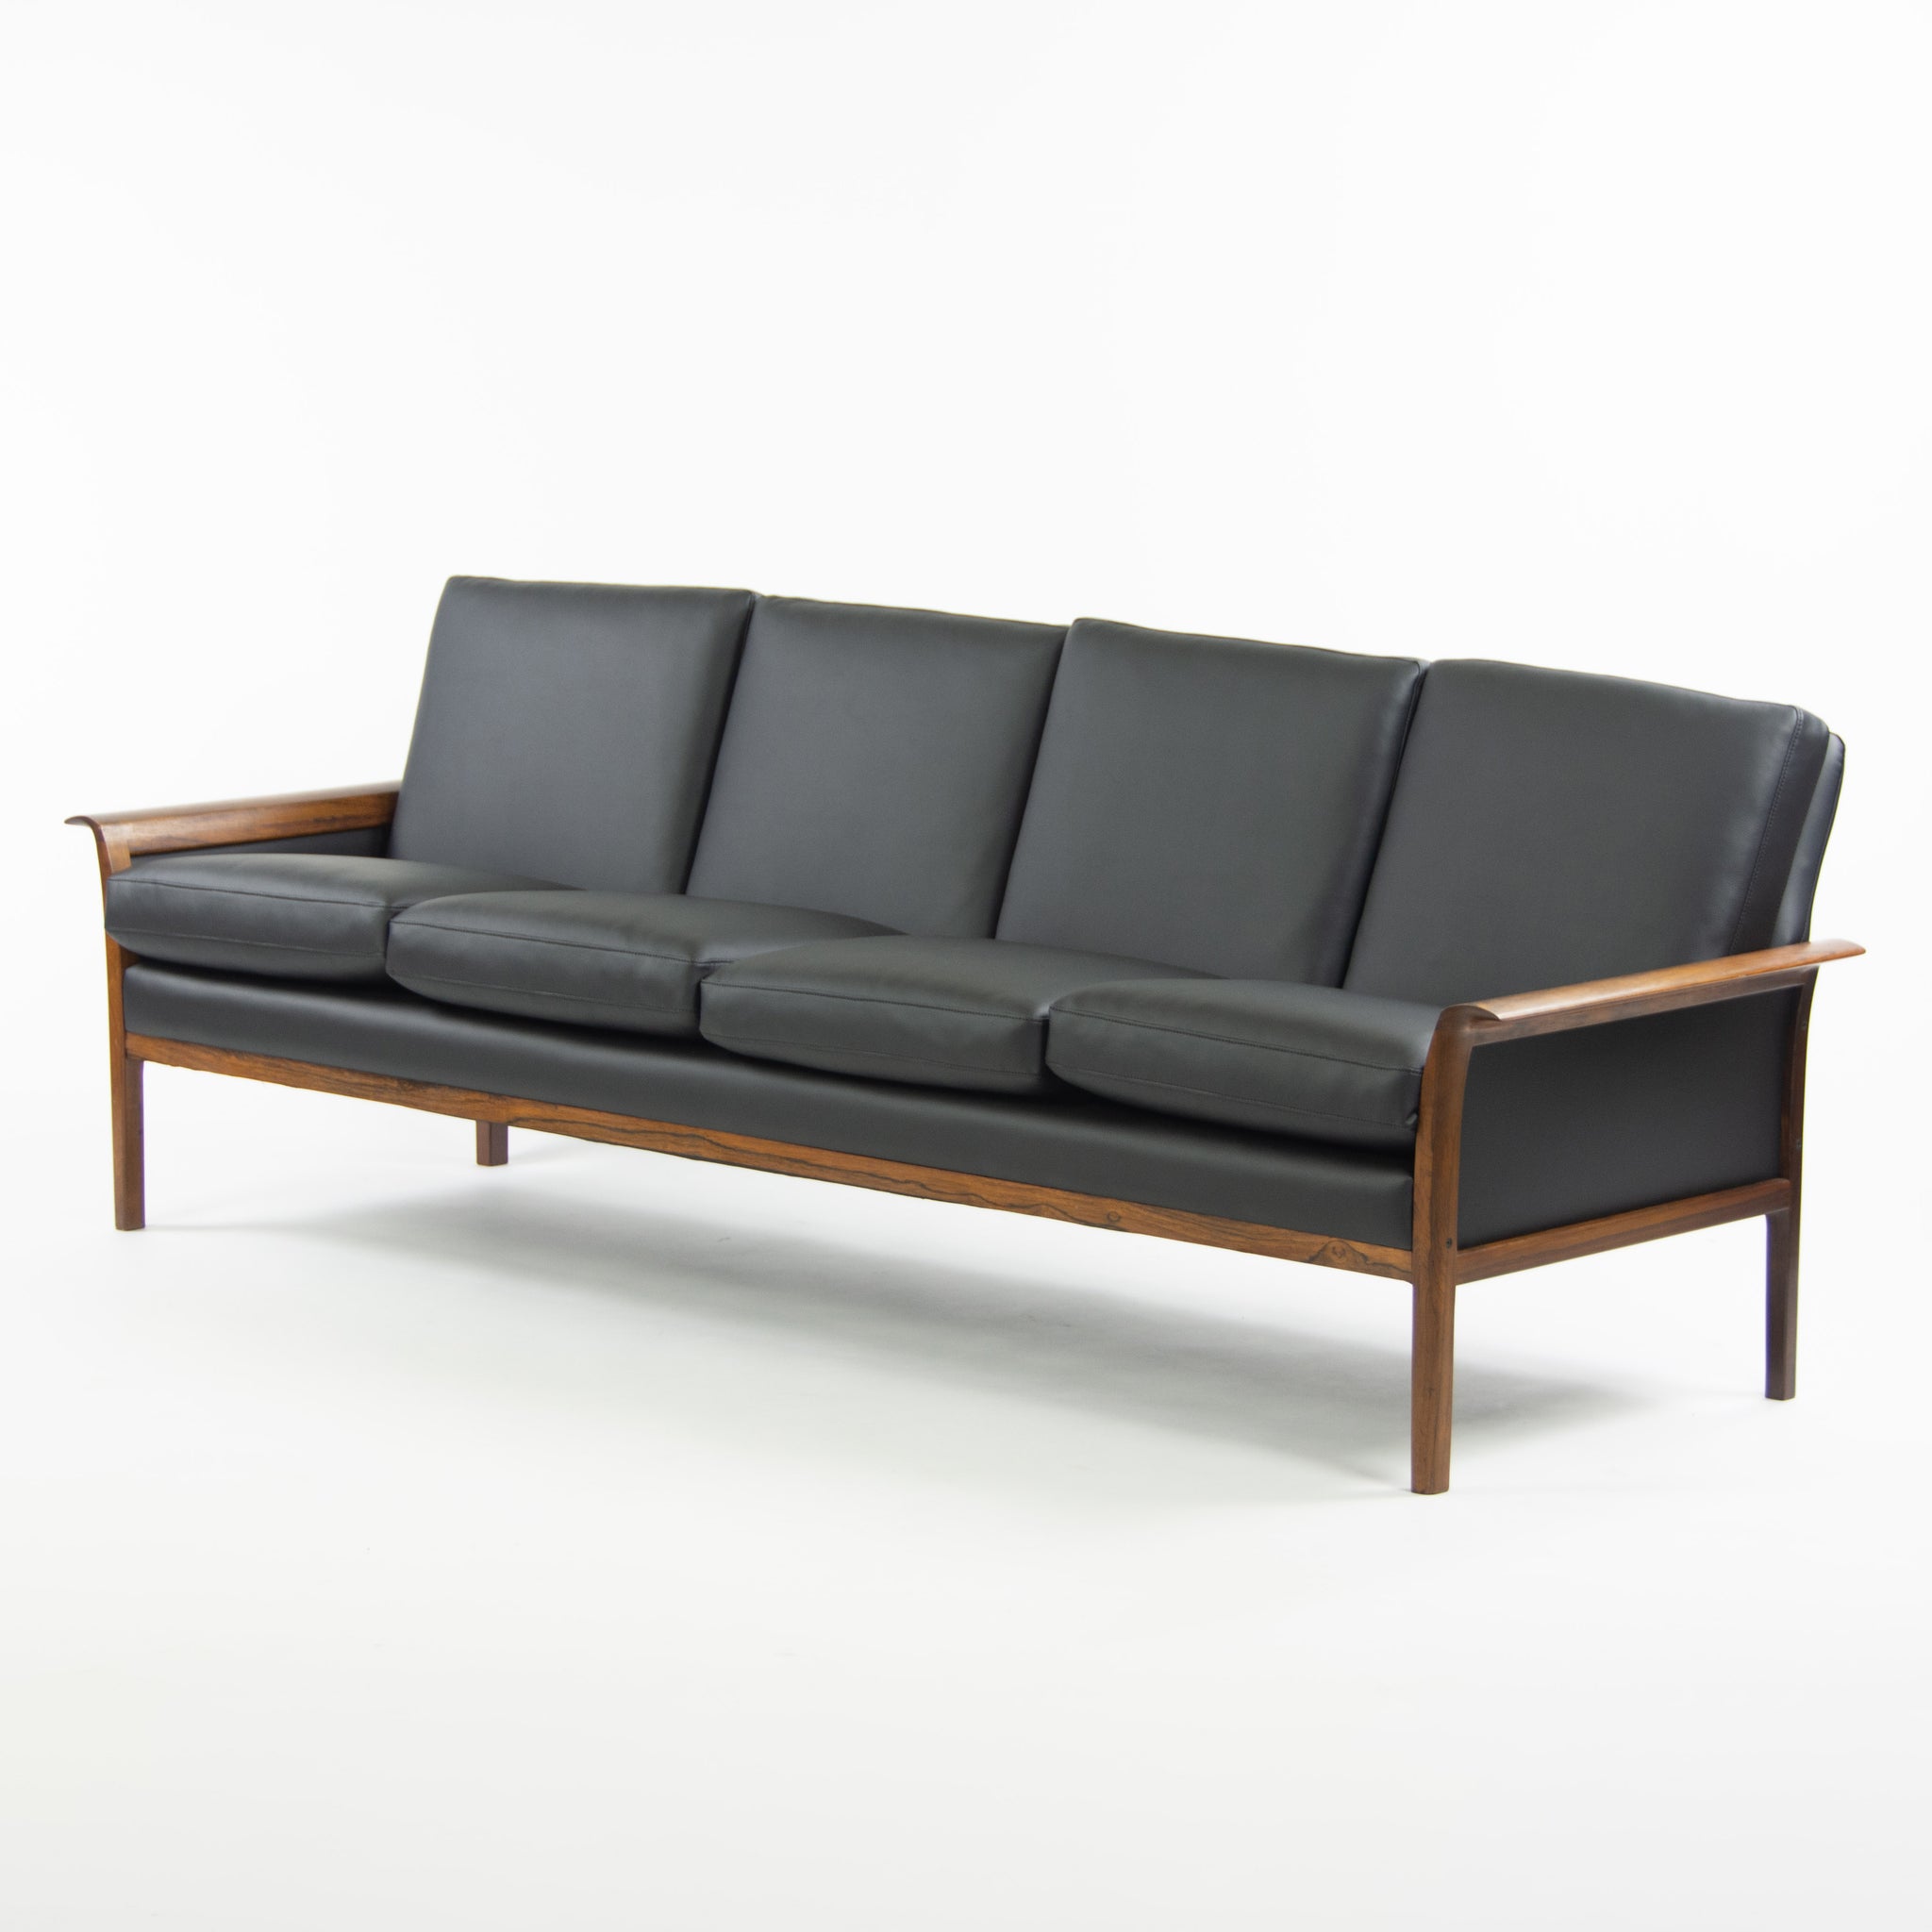 1960's Knut Saeter Rosewood Sofa for Vatne Mobler Norway New Black Upholstery